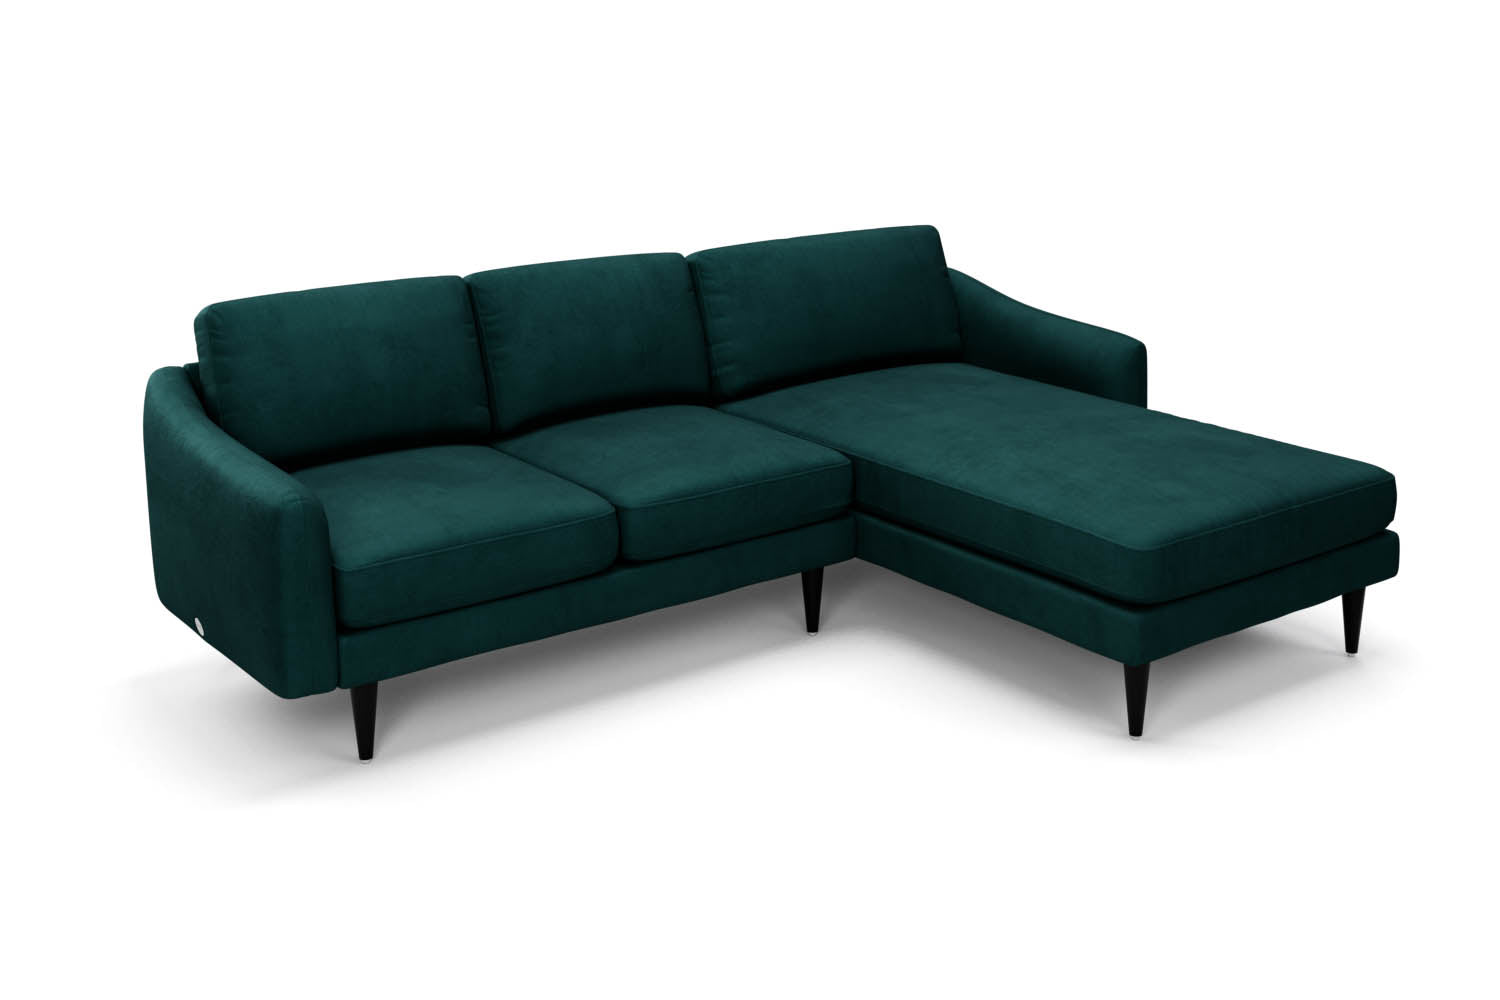 The Rebel - Right Hand Chaise Sofa - Pine Green